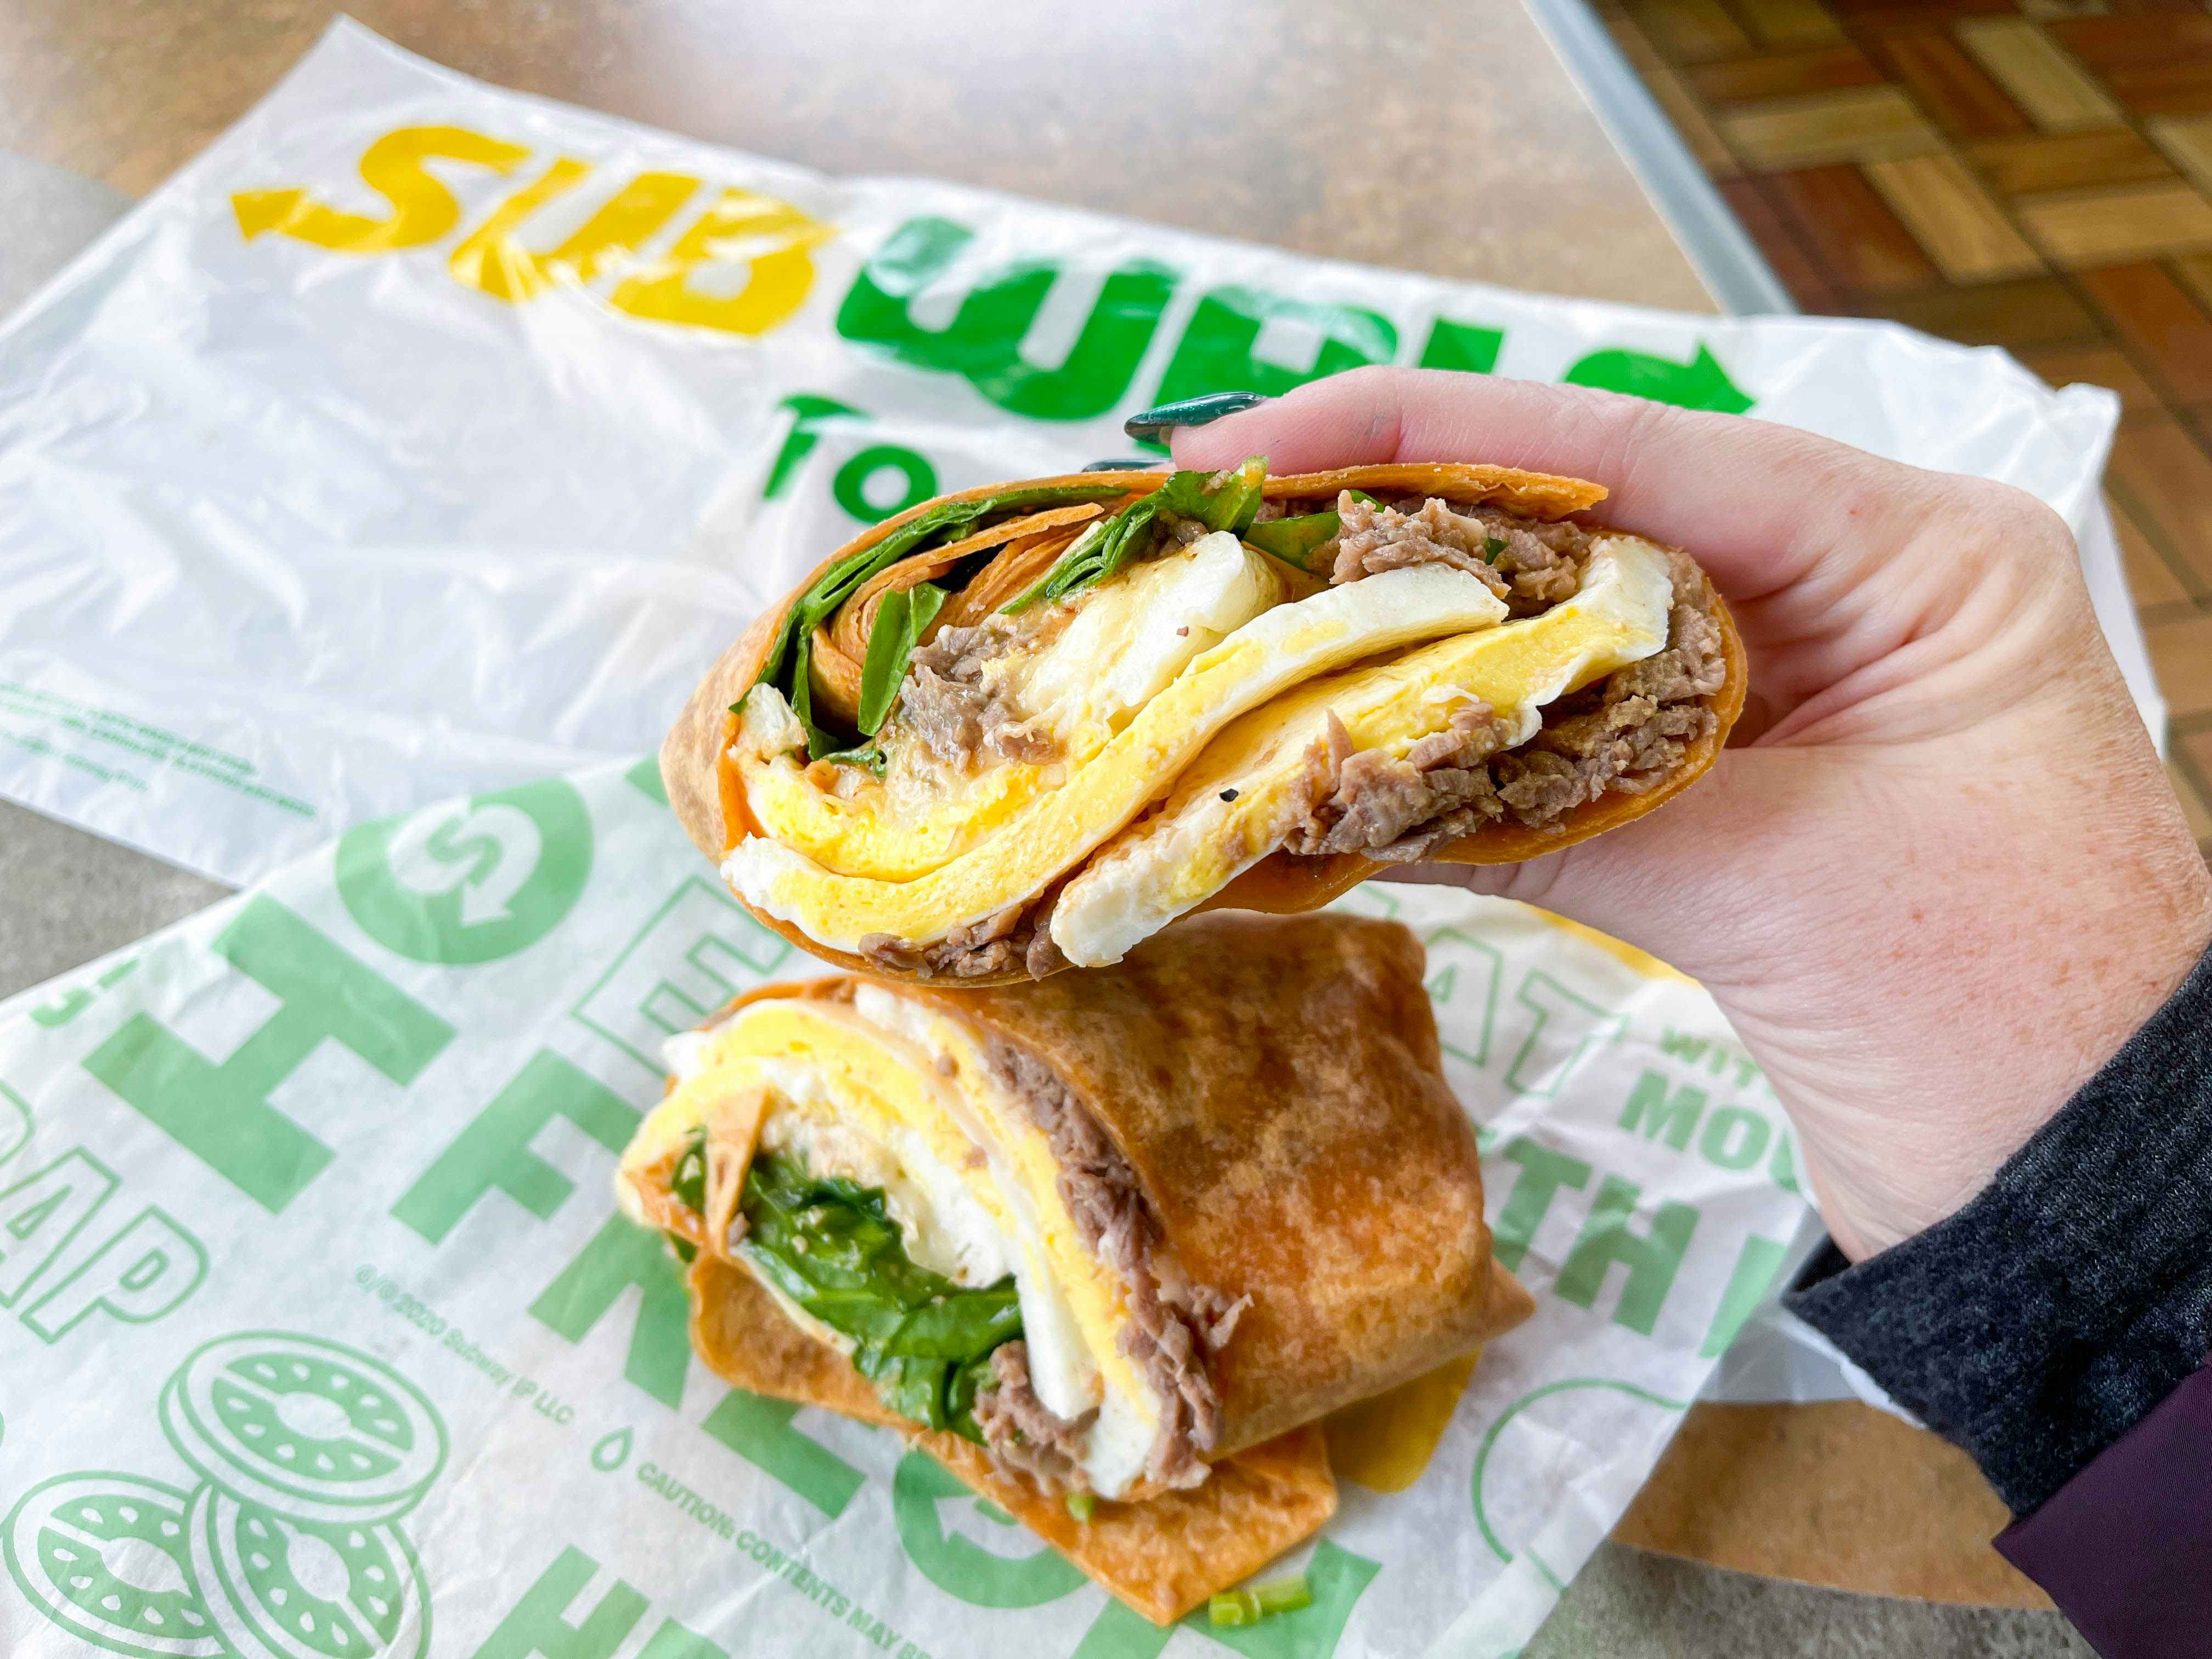 Subway® on X: This $5.99 footlong is just one of the ways we're looking  out for you right now. Take a screenshot of the coupon and show it at  pickup. Take out